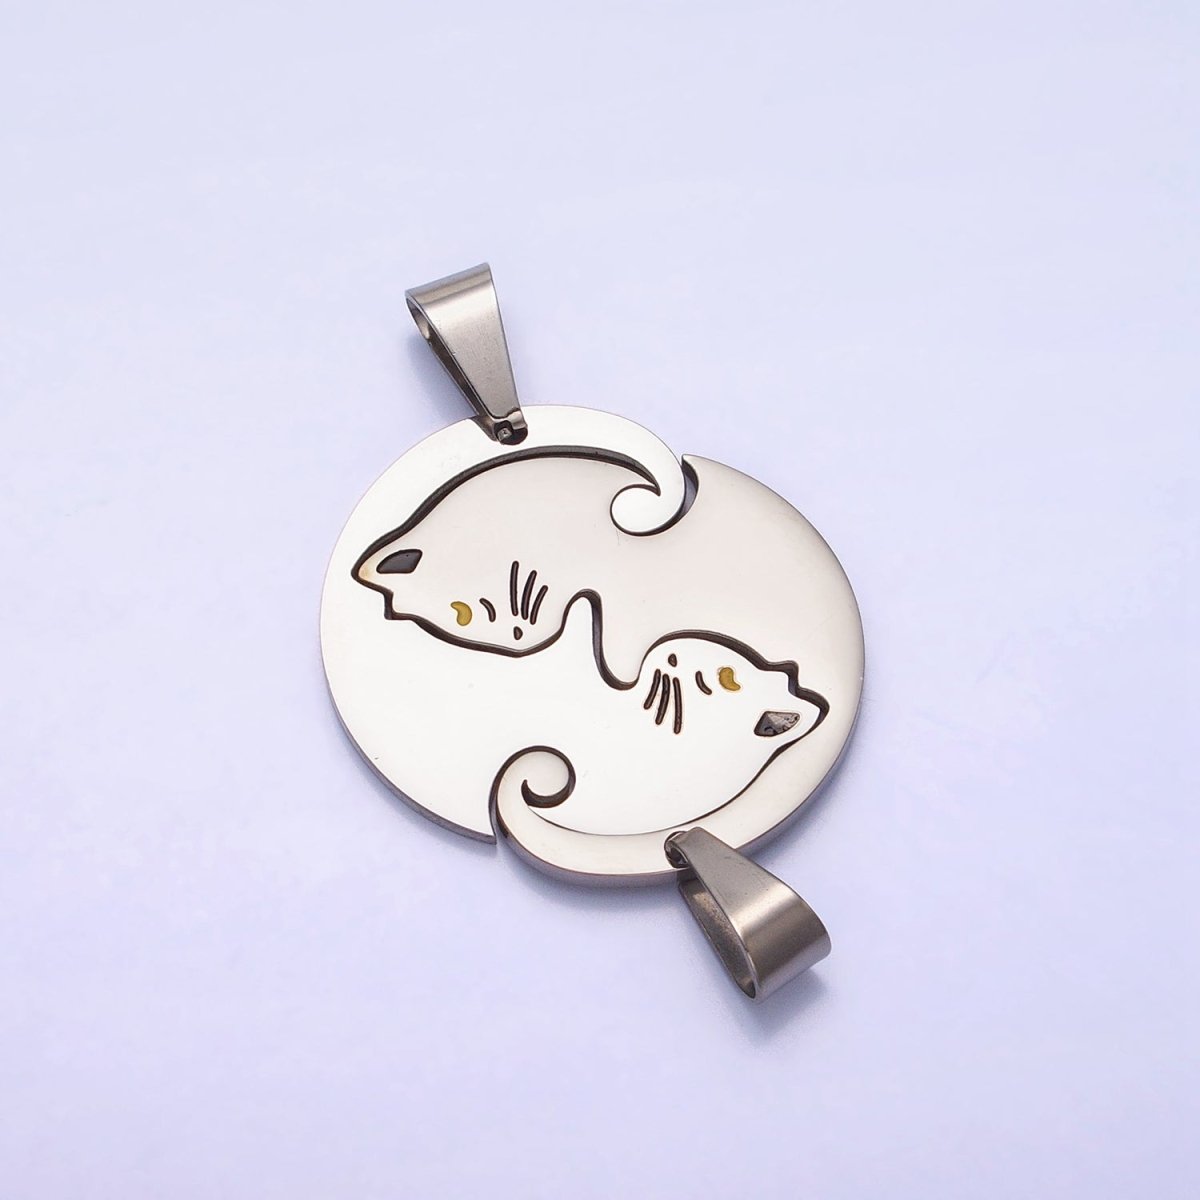 Stainless Steel Sleeping Kitty Cat Couple's Friendship Pendant Set in Gold & Silver | P-1122 - DLUXCA